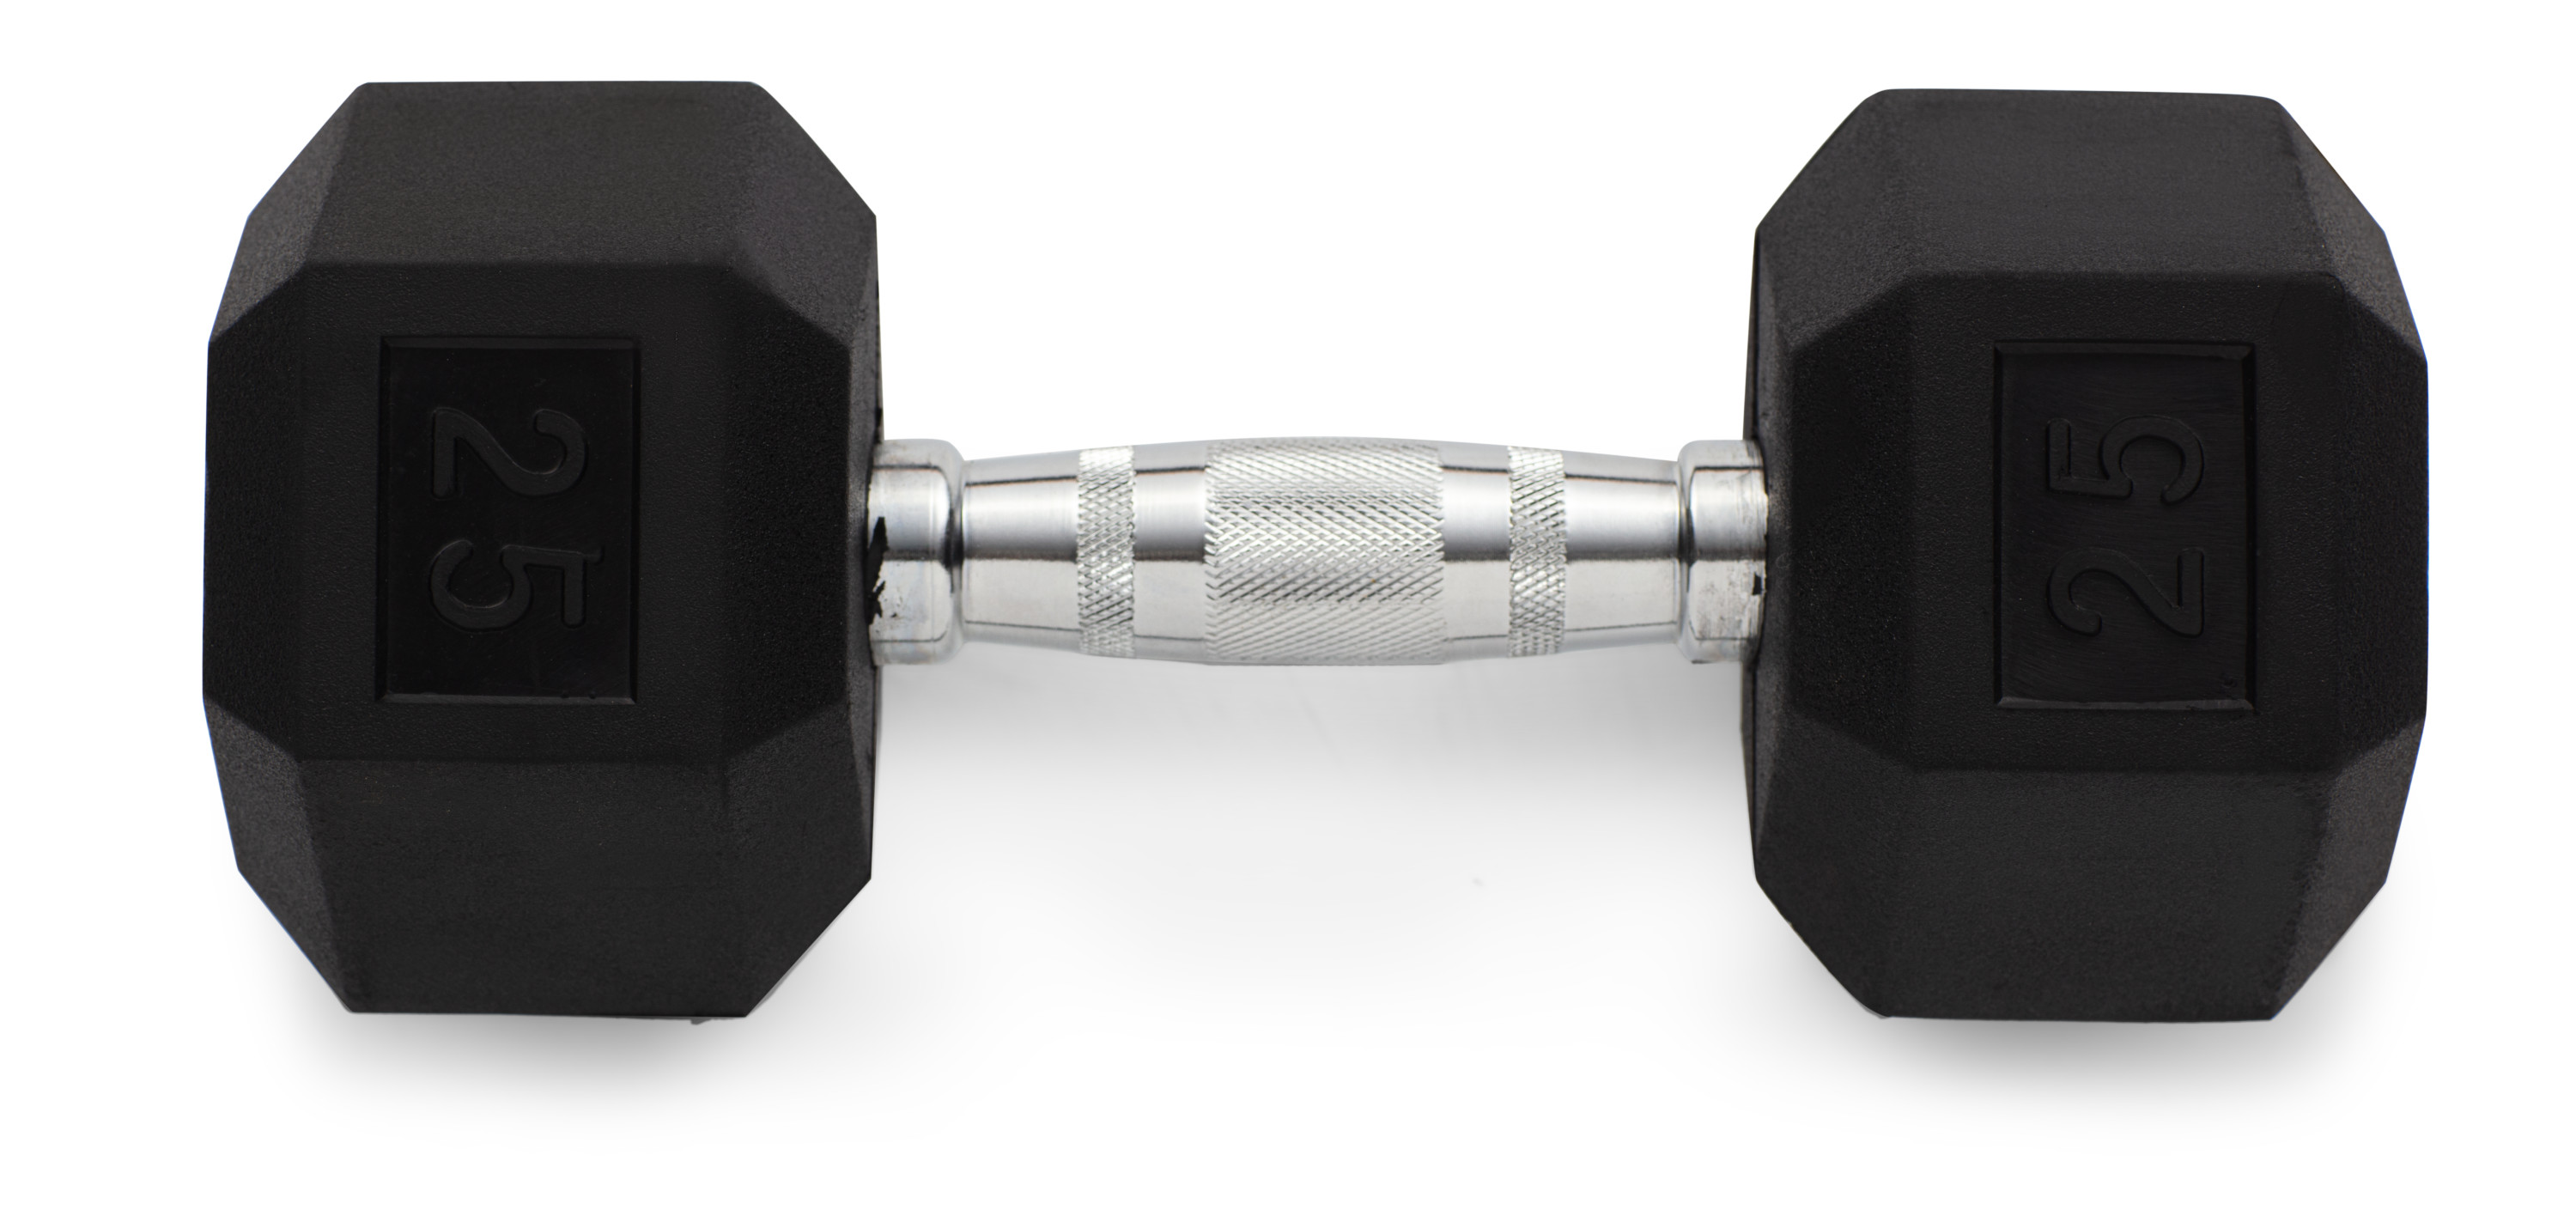 Weider Rubber Hex Dumbbell w/ Chrome Handle & Knurled Grip: 25lb $28, 30lb $31, 35lb $34, 40lb $38 + Free Shipping w/ Walmart+ or on $35+